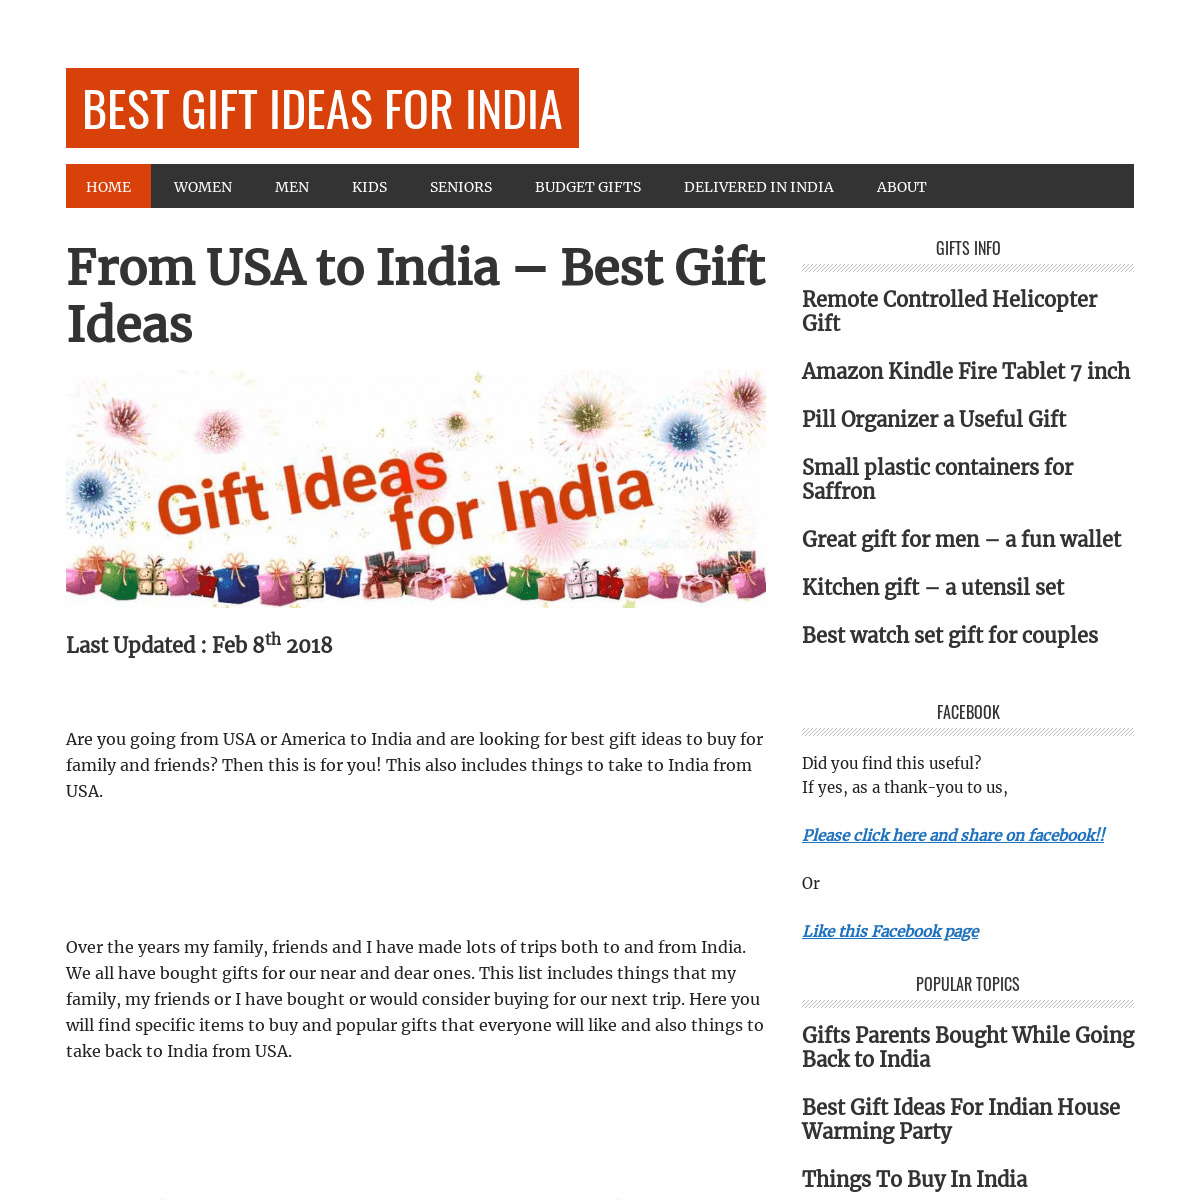 From USA to India - Best Gift Ideas - Best Gift Ideas for India